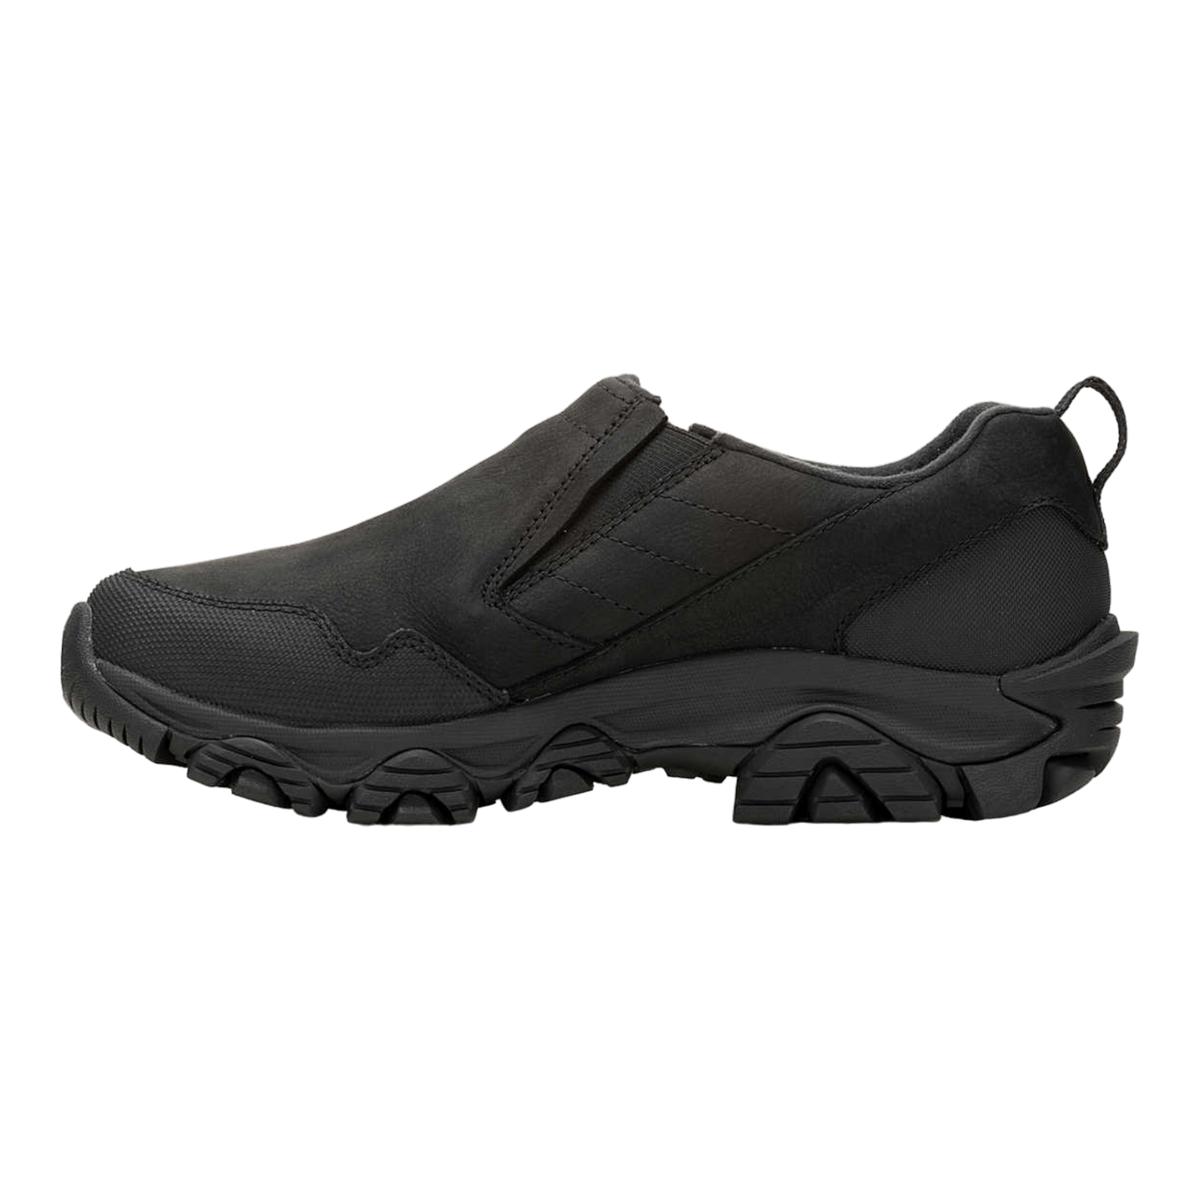 Women's ColdPack 3 Thermo Moc Waterproof - Dardano's Shoes